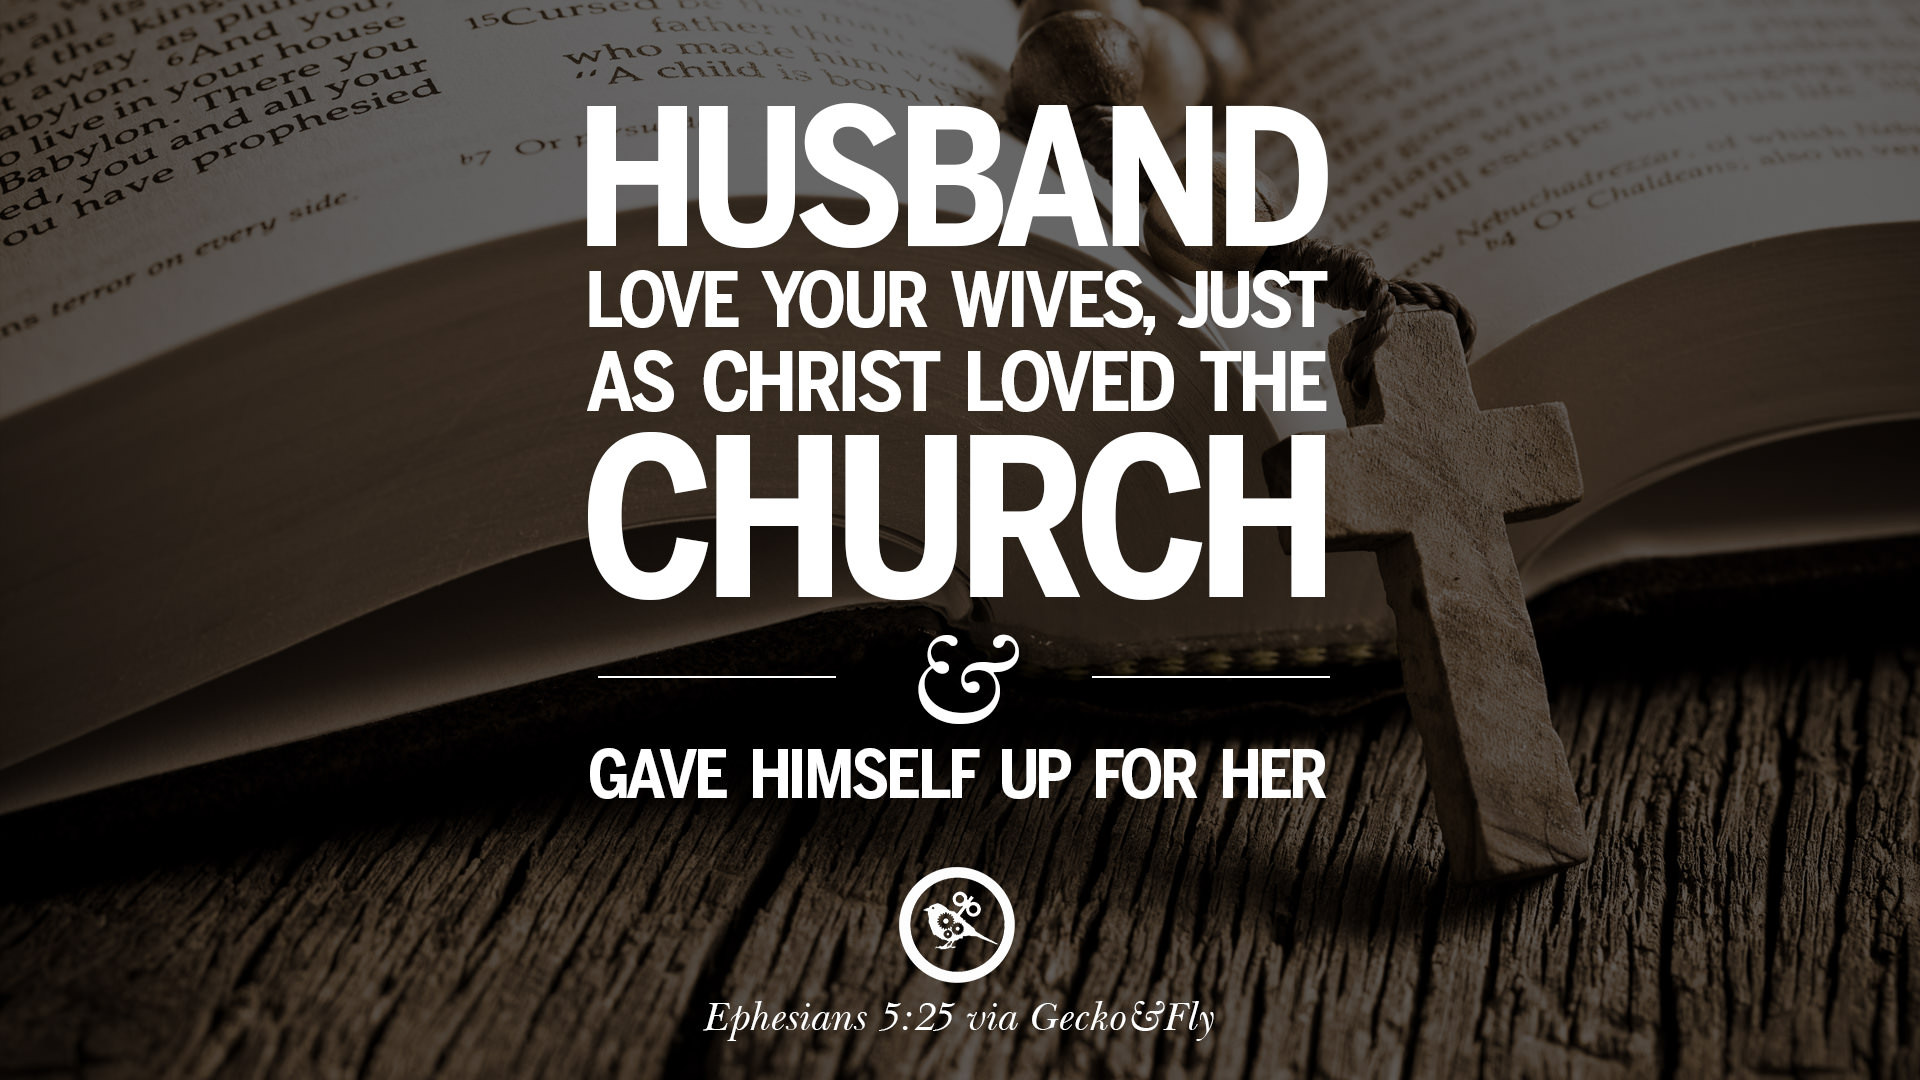 Relationships Quotes From The Bible
 7 Bible Verses About Love Relationships Marriage Family